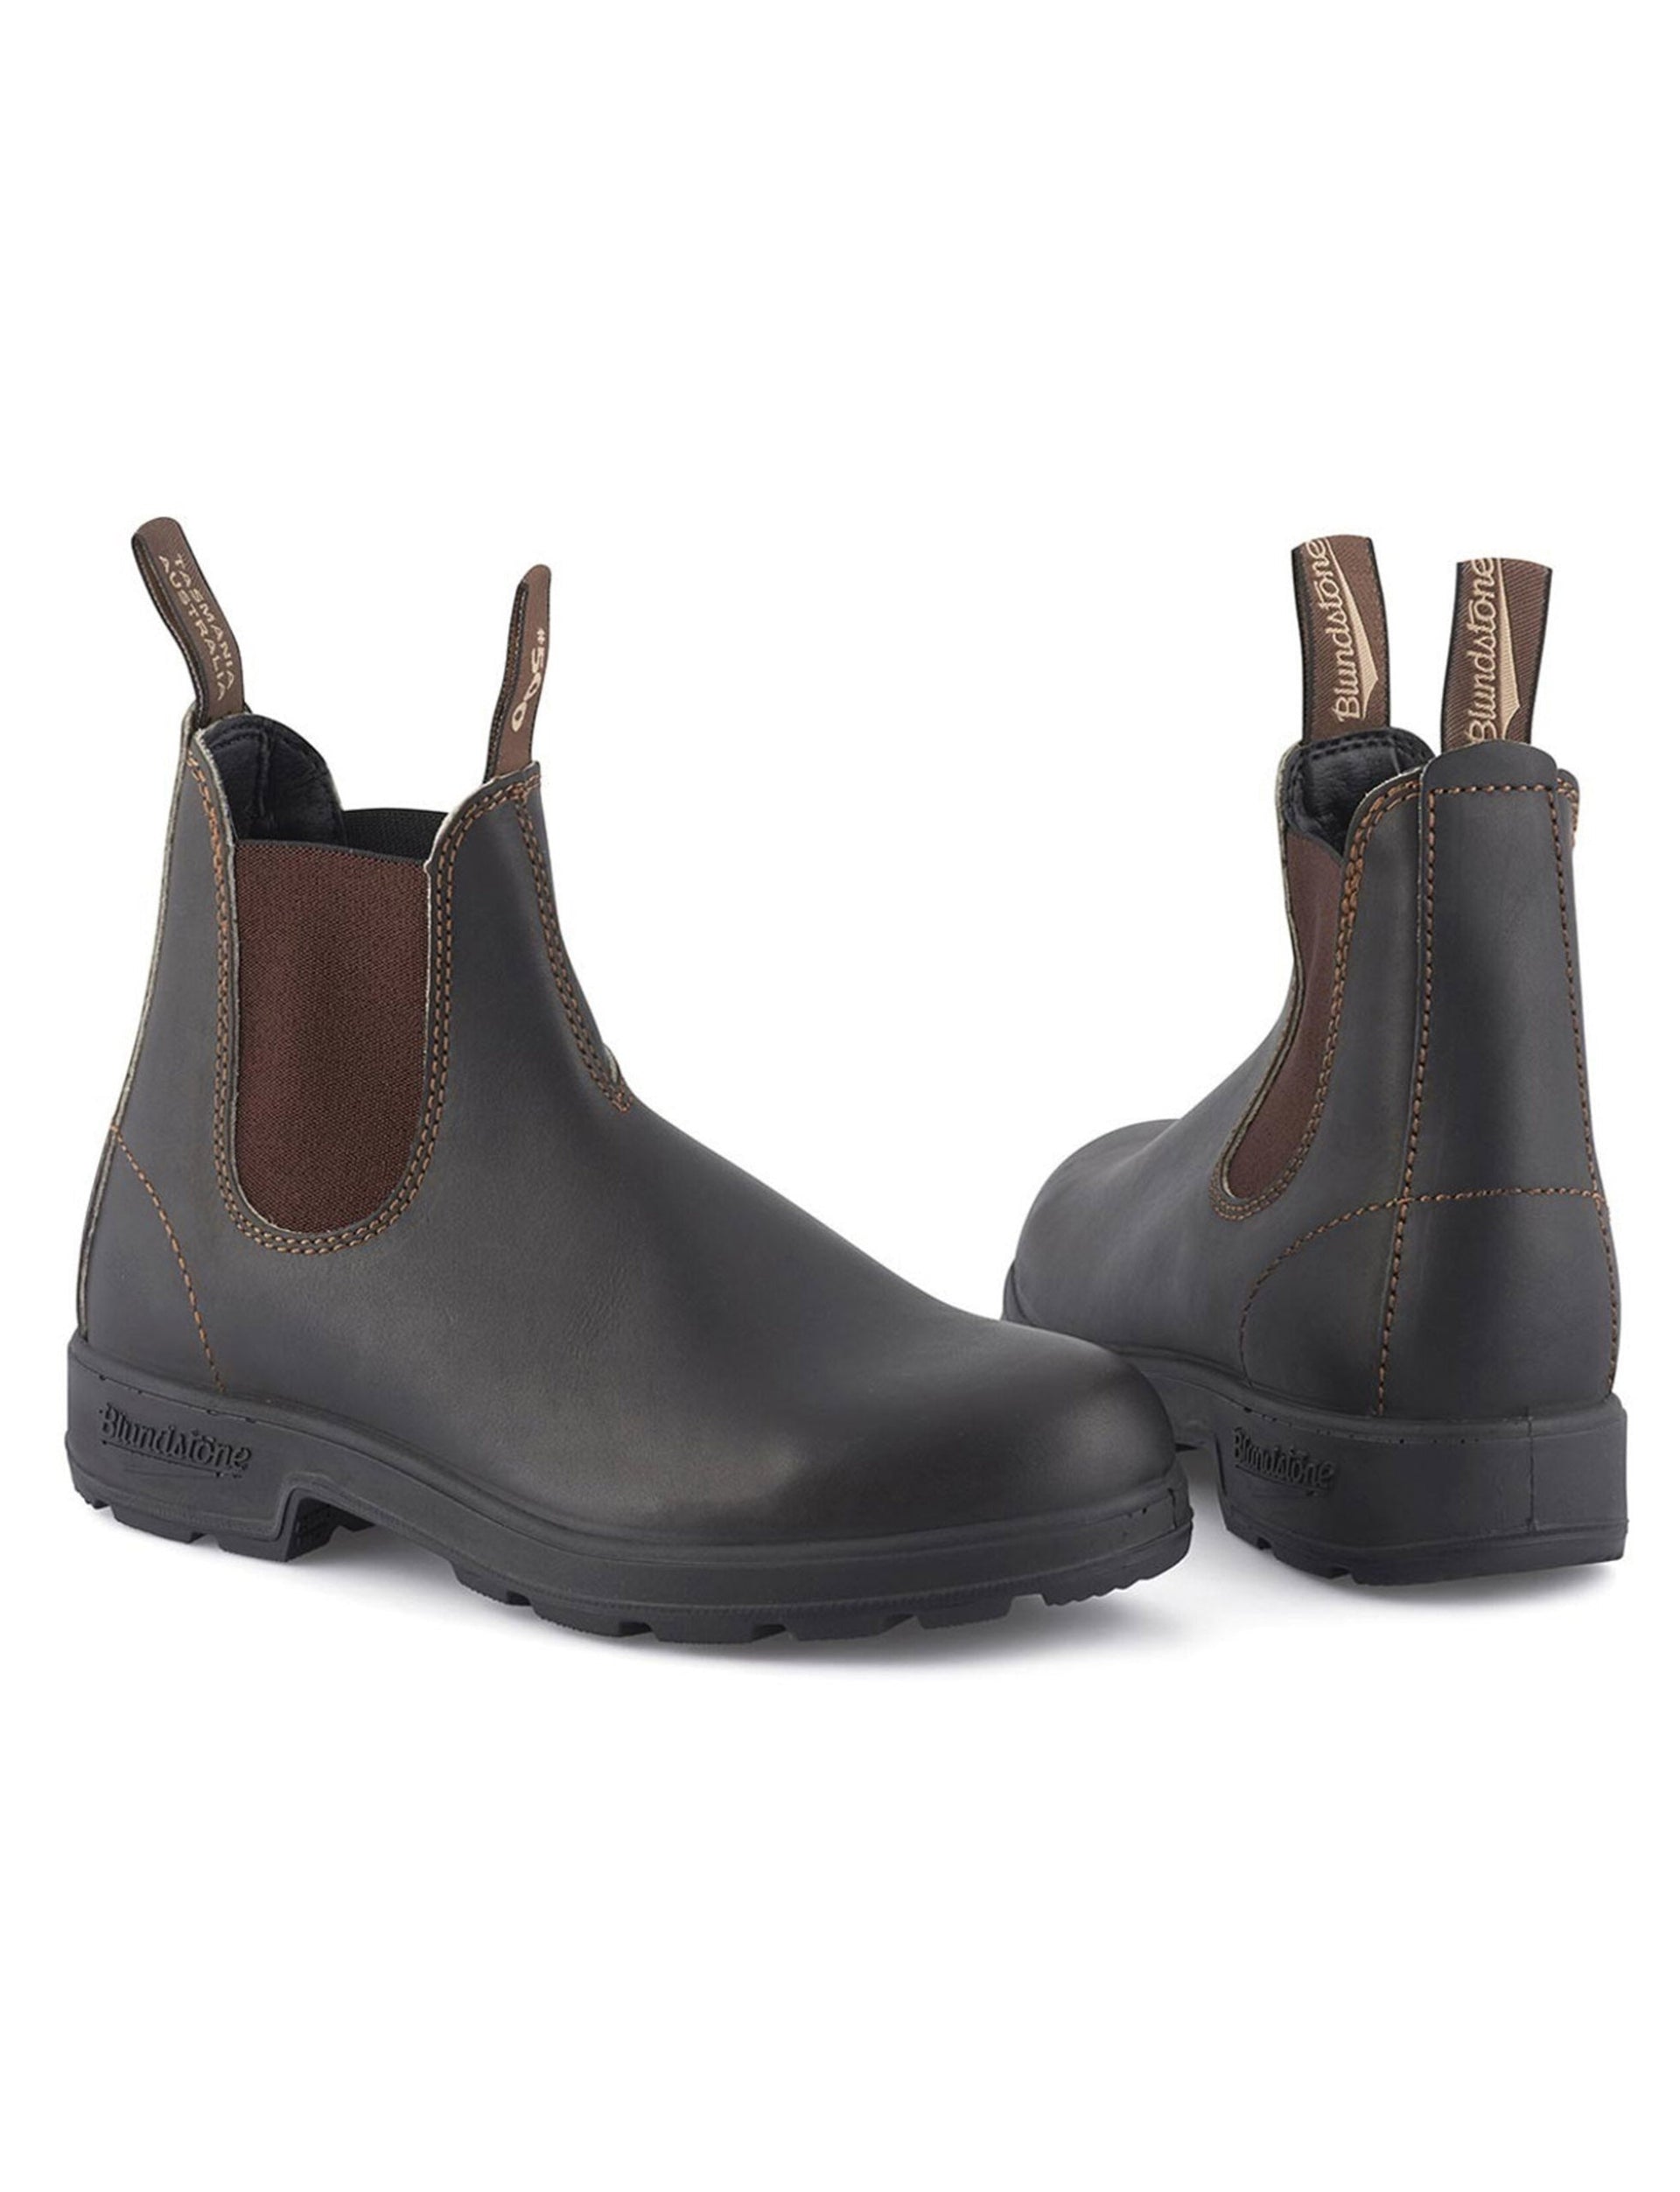 BLUNDSTONE 500 STOUT BROWN LEATHER